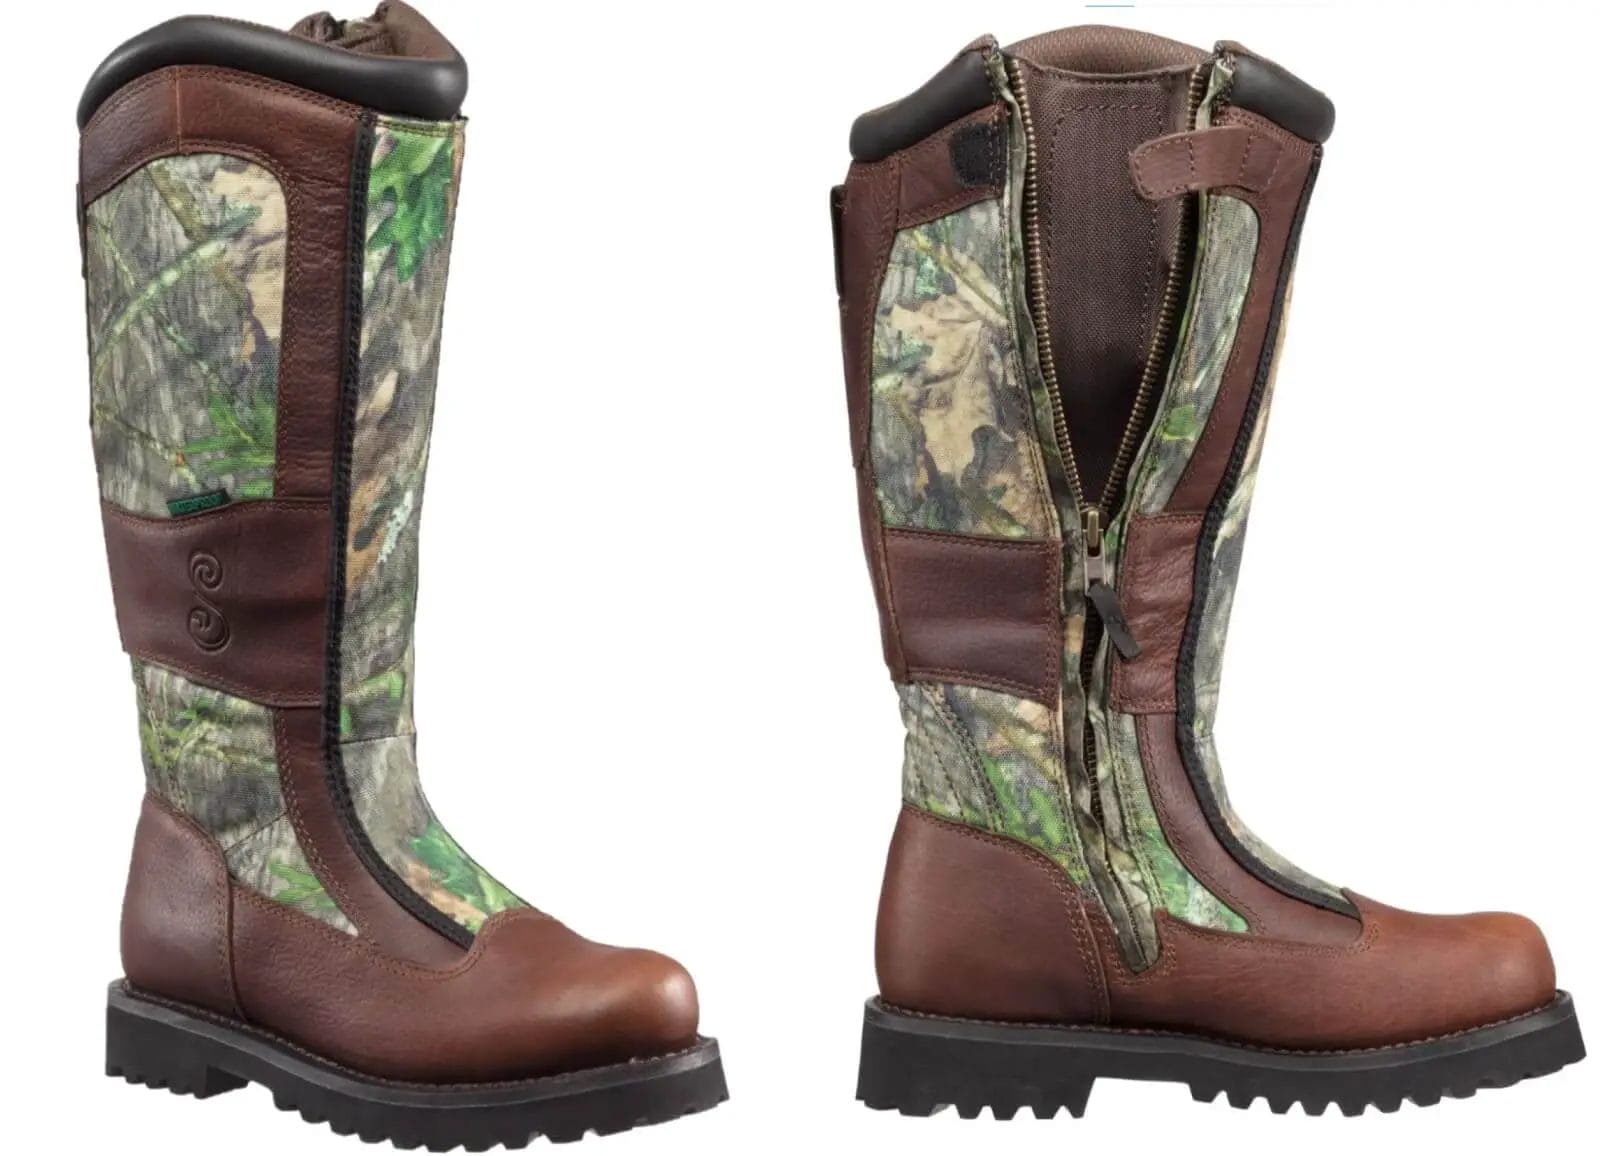 Best Snake Boots for Women and Men in 2022